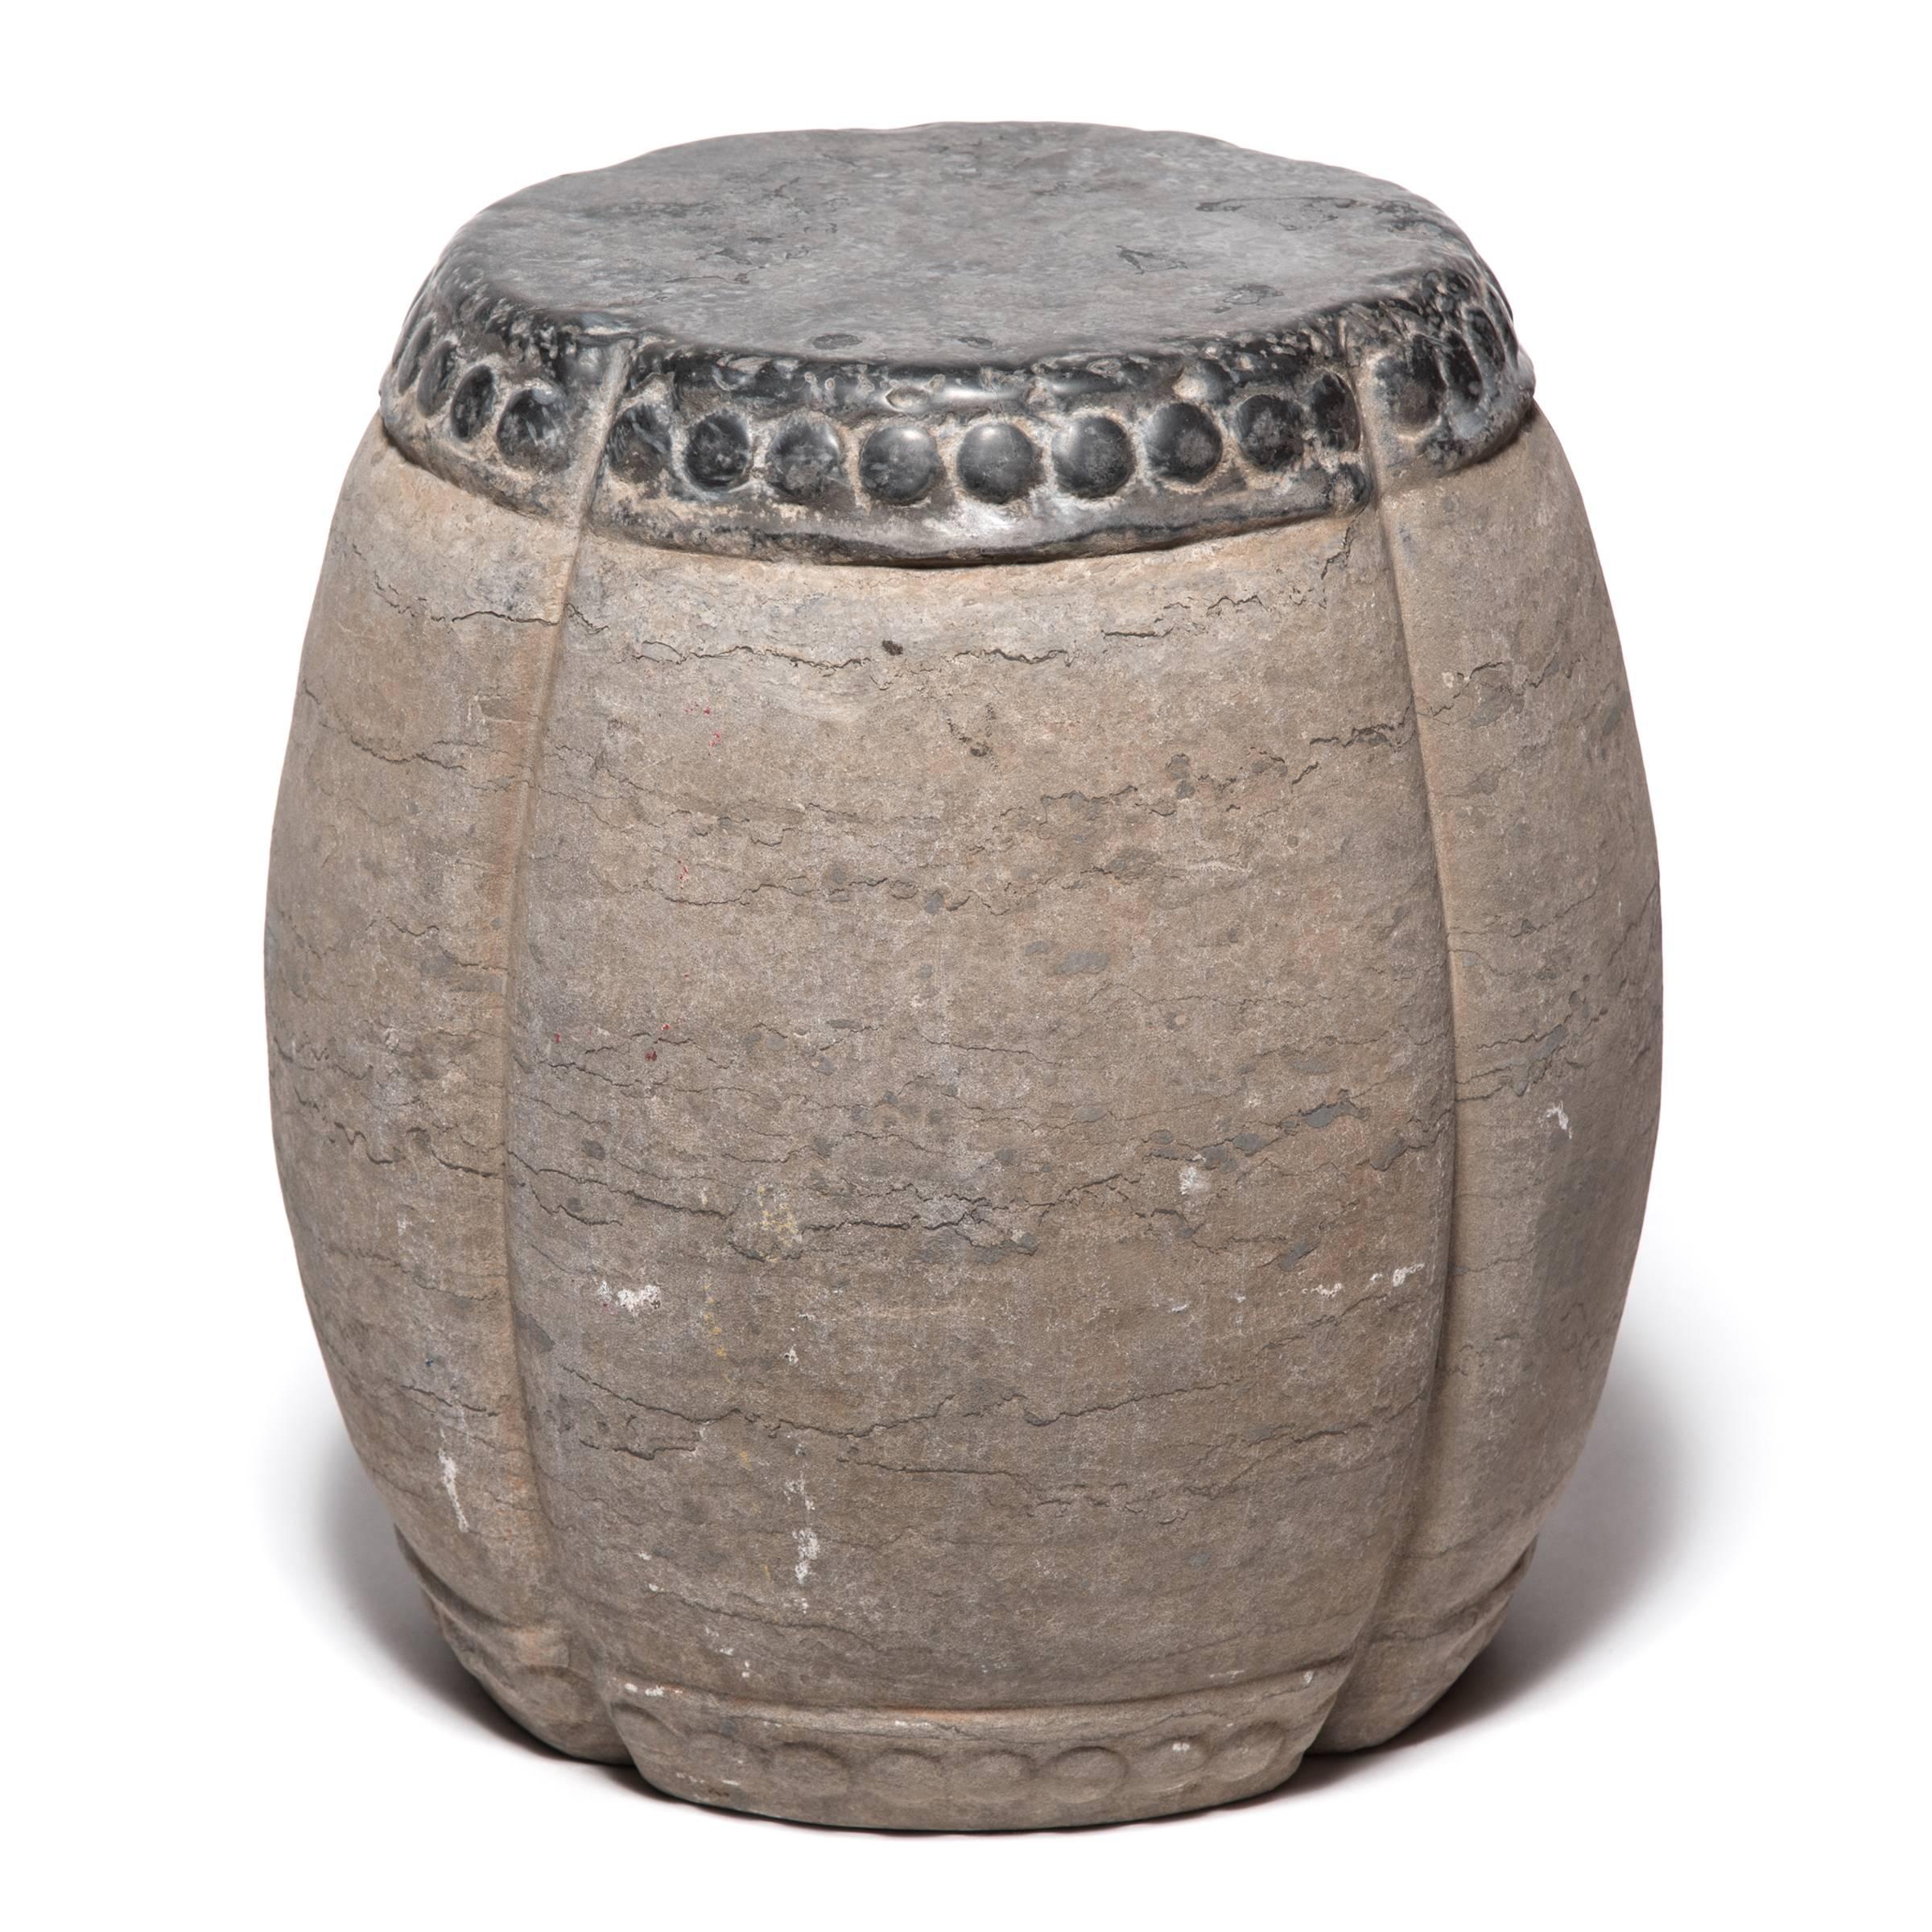 Marked by expressive veining, this handsome stool was carved in China’s Shanxi province out of a piece of solid limestone. Ribbed and rounded, the stool suggests a melon, an ancient Chinese symbol of perpetuity. Traditionally used as a place to rest